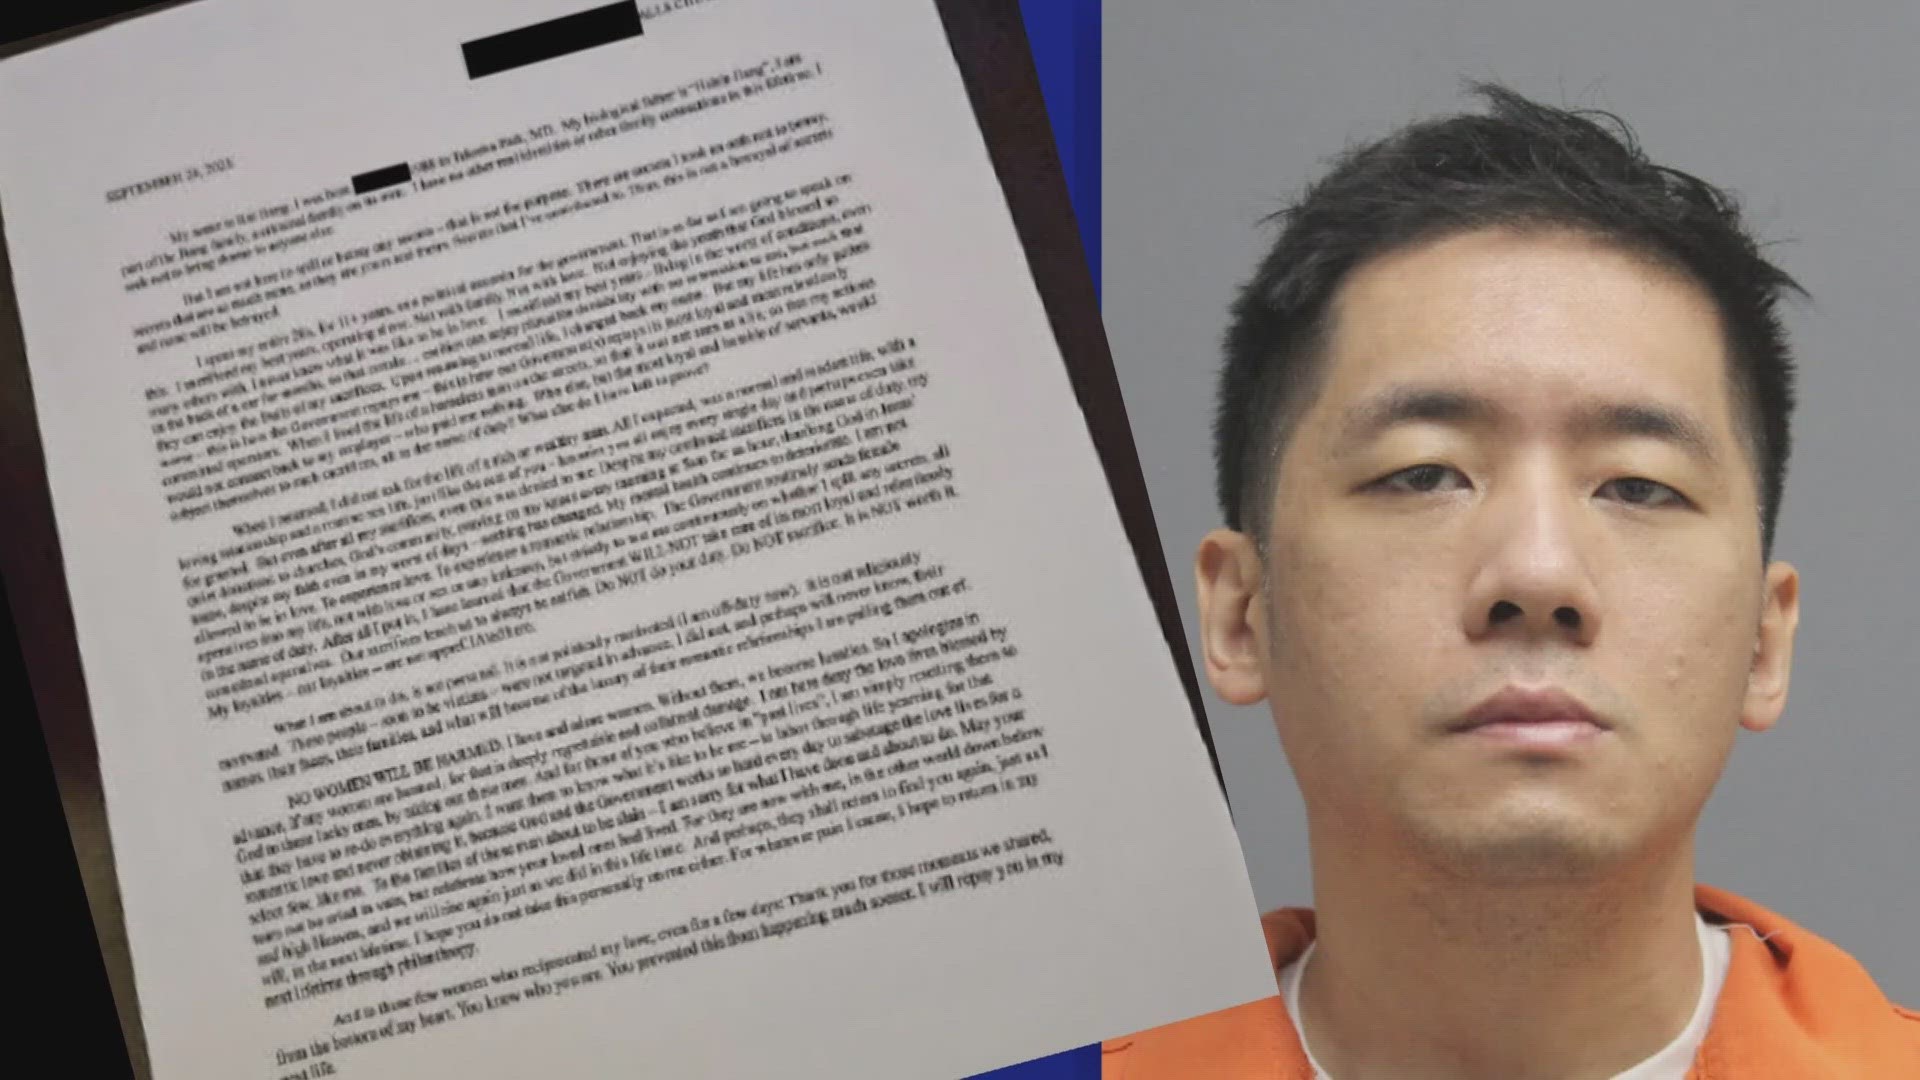 The case against Rui Jiang has been moved to federal court months after he was accused of trying to shoot church members in Prince William County.